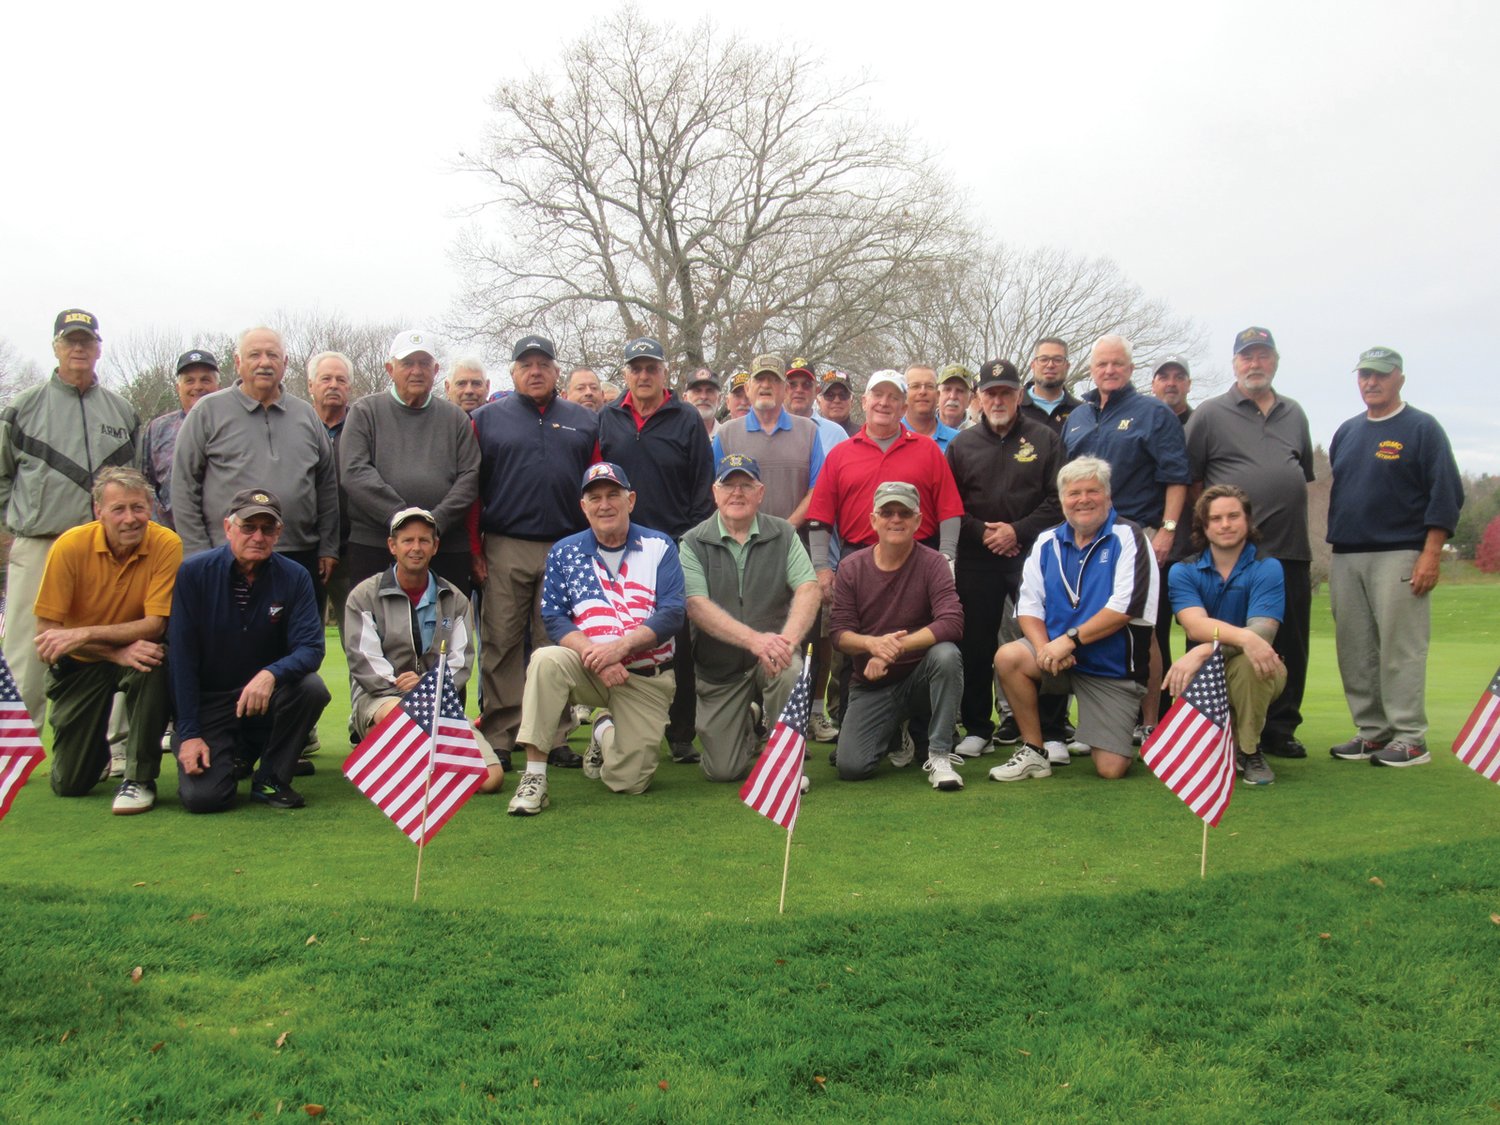 SPECIAL SALUTE: This is the group of 46 veterans who were honored and played in last week’s highly successful 2nd Annual Veterans Day Golf Tournament hosted by Gloucester Country Club. (Sun Rise photos by Pete Fontaine)